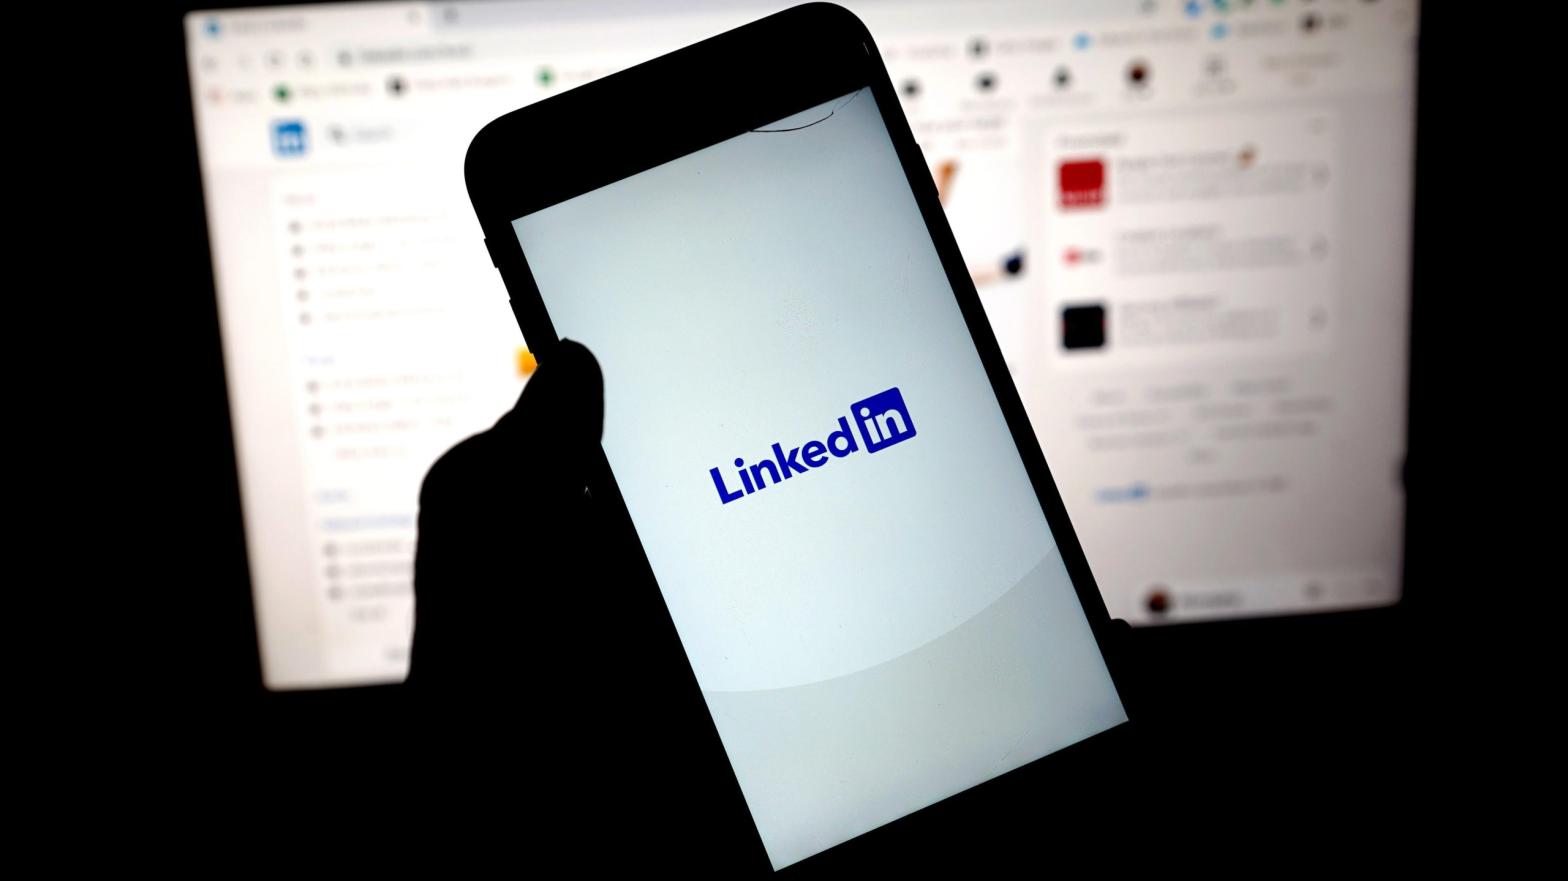 The LinkedIn app running on a smartphone in January 2021. (Photo: Edward Smith, Getty Images)